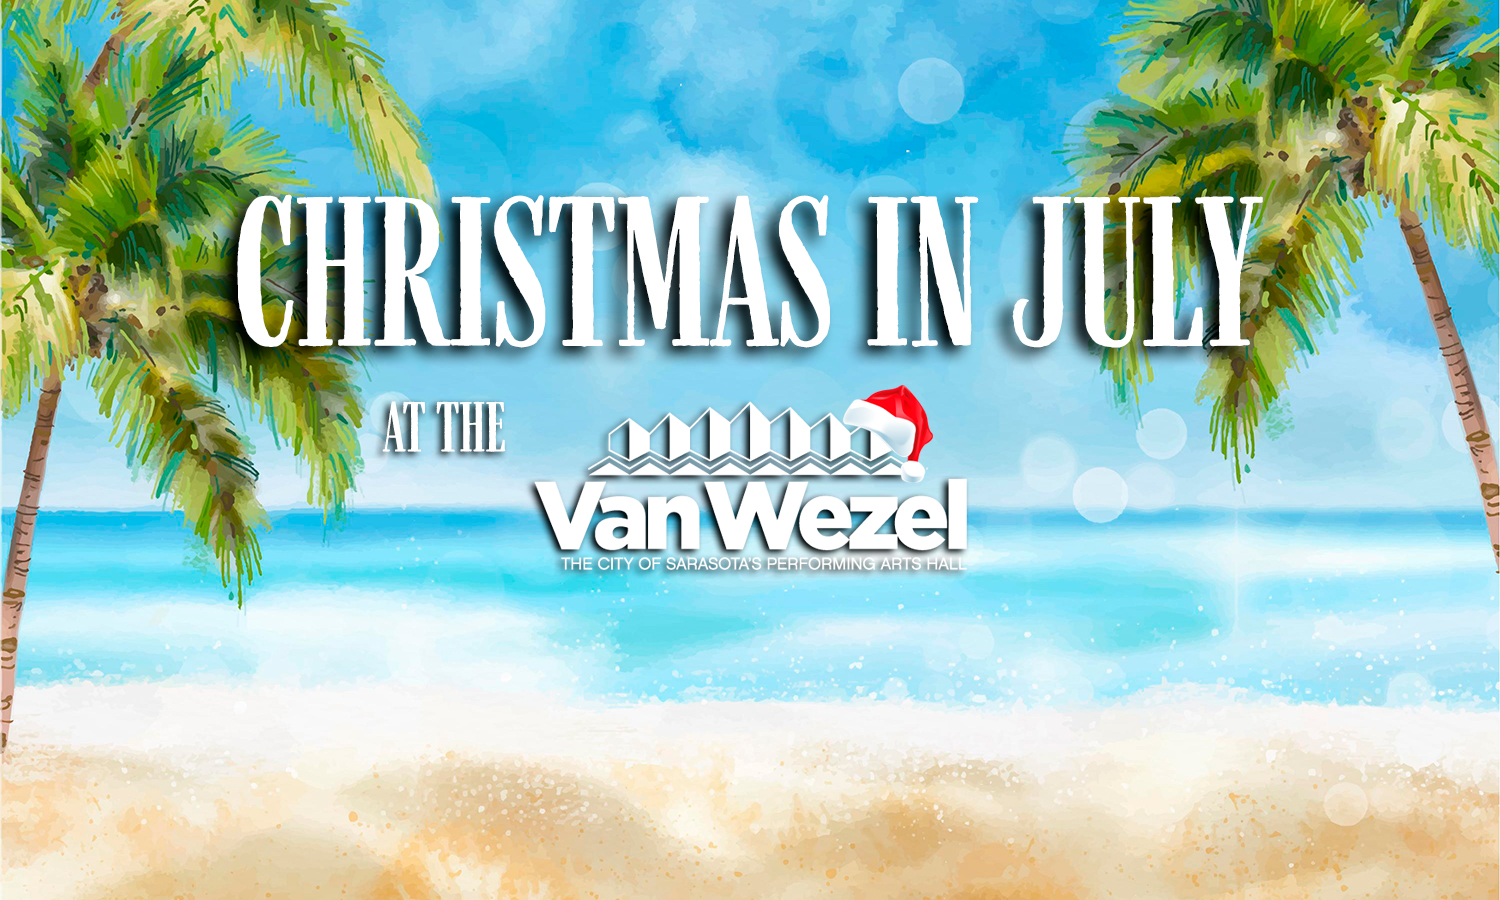 Christmas in July 2023